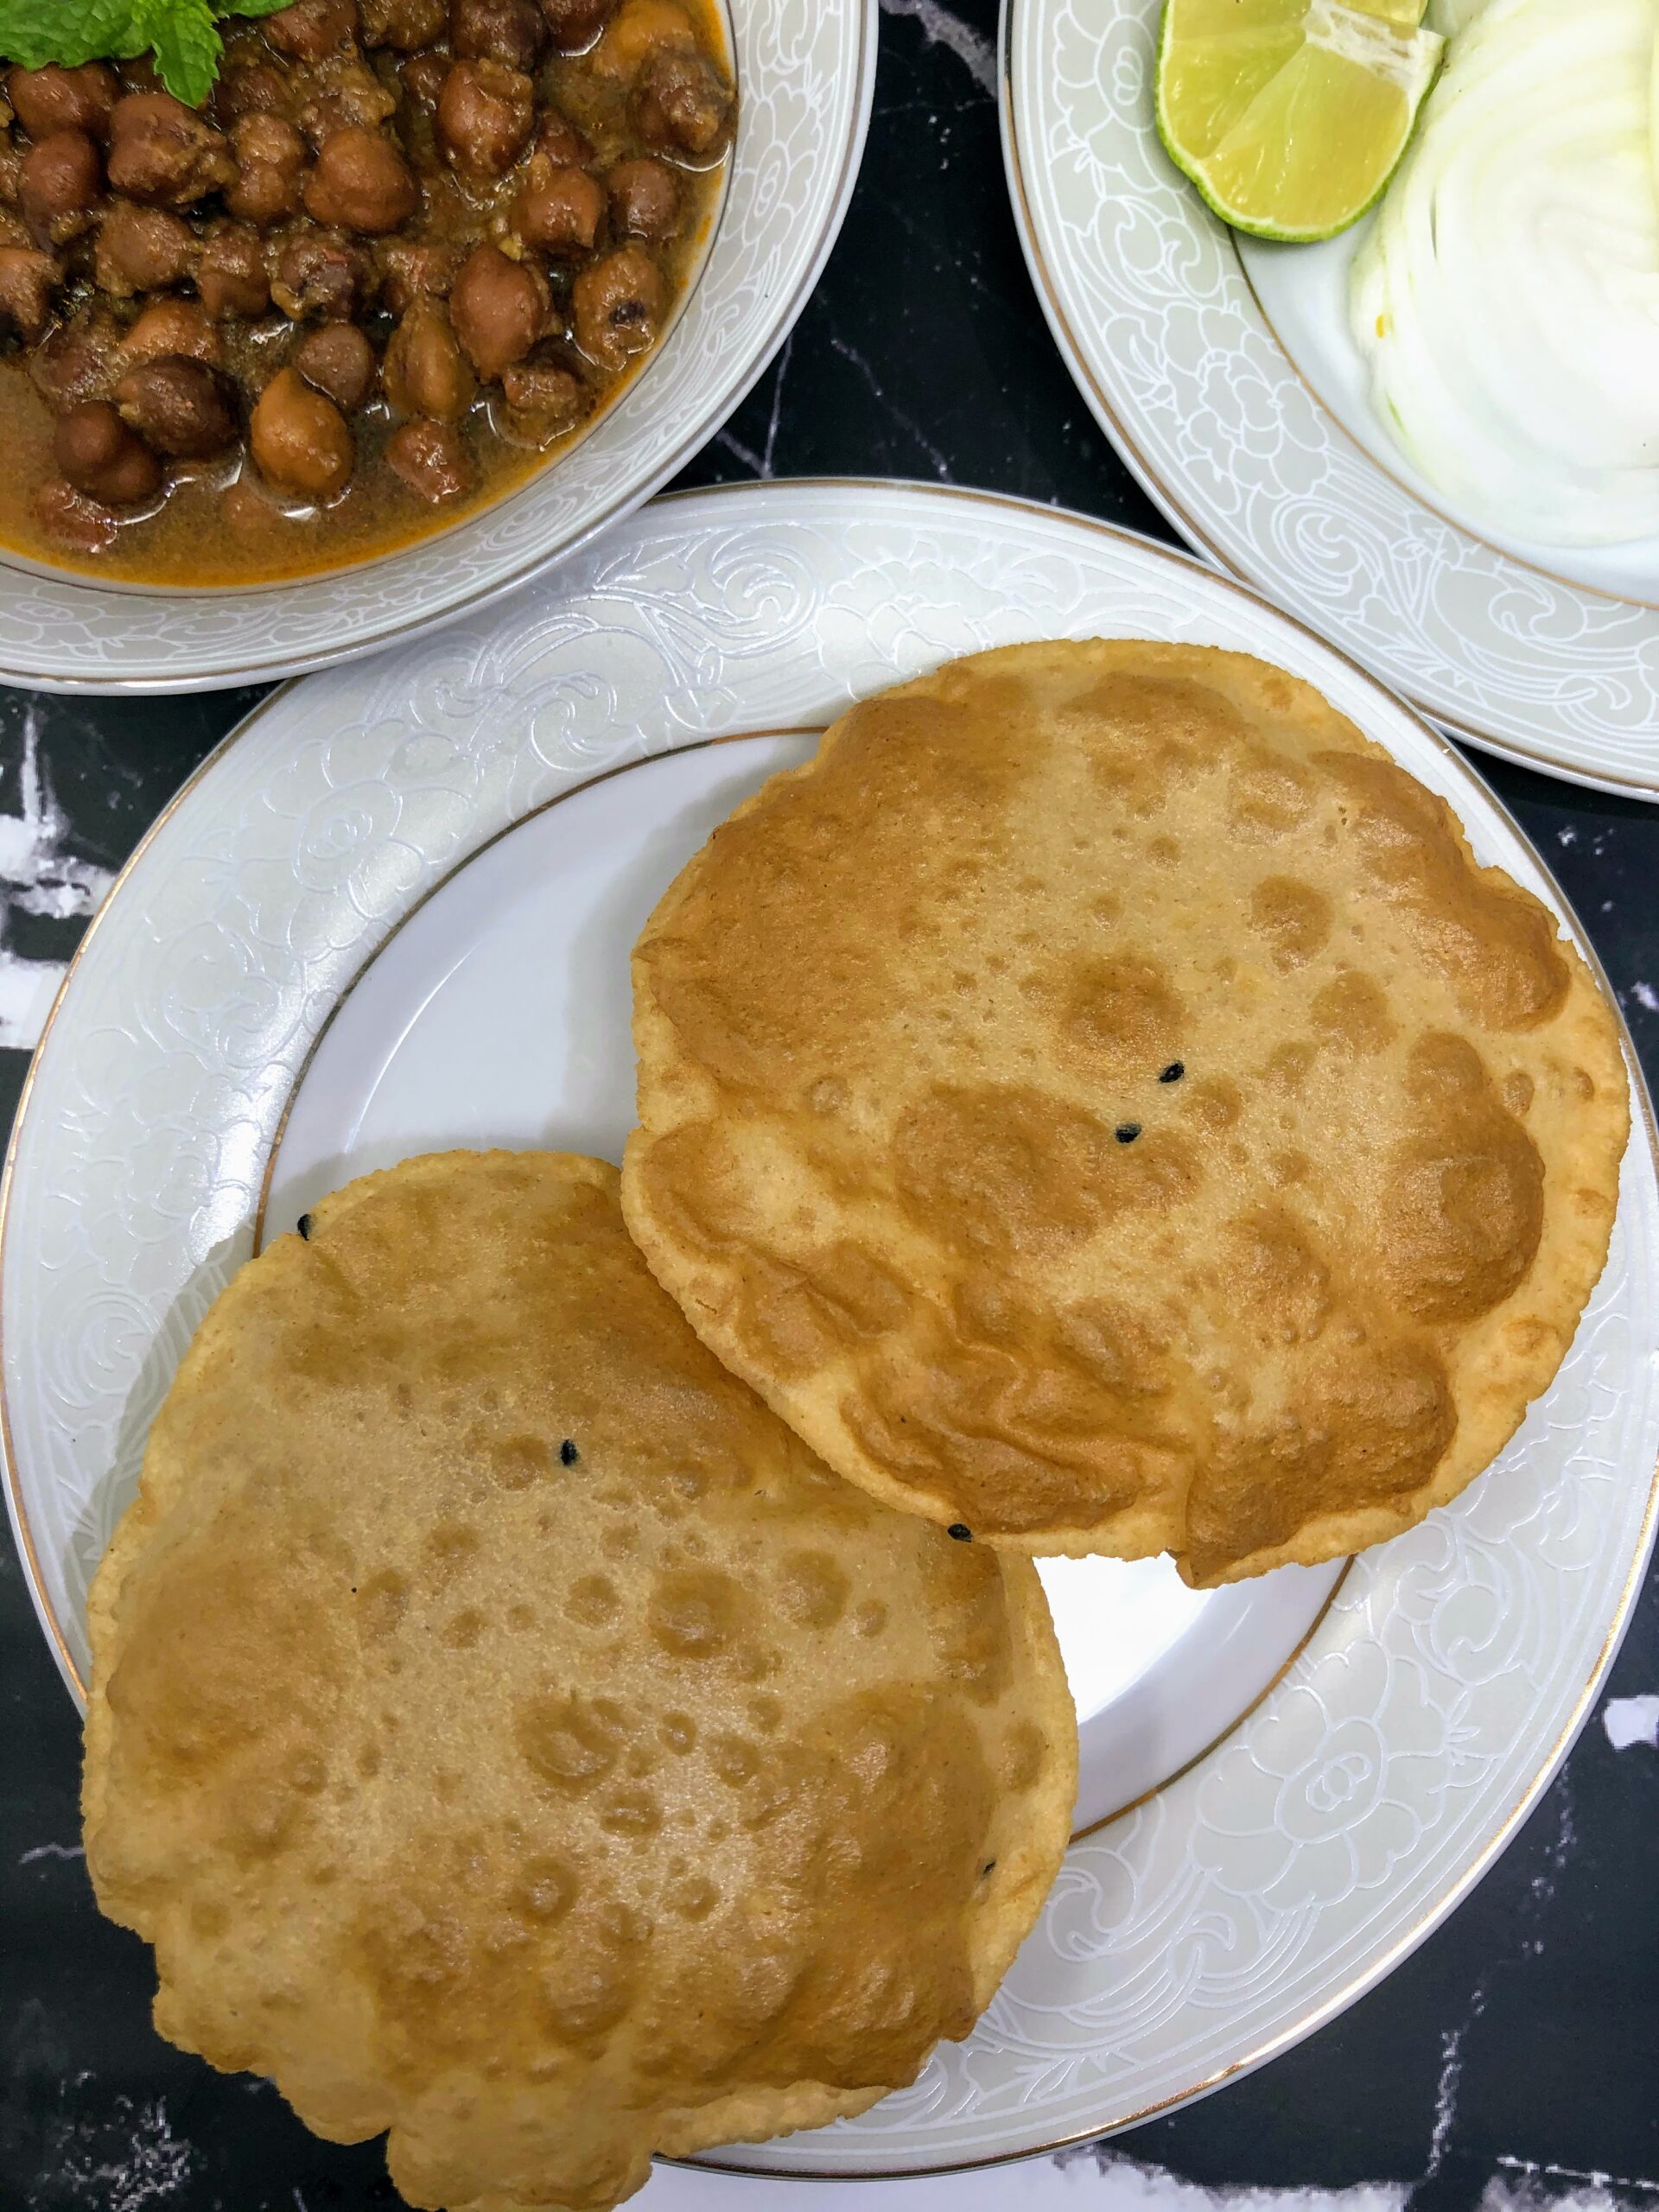 Two Deep fried puri or Indian puffy bread served in a plate